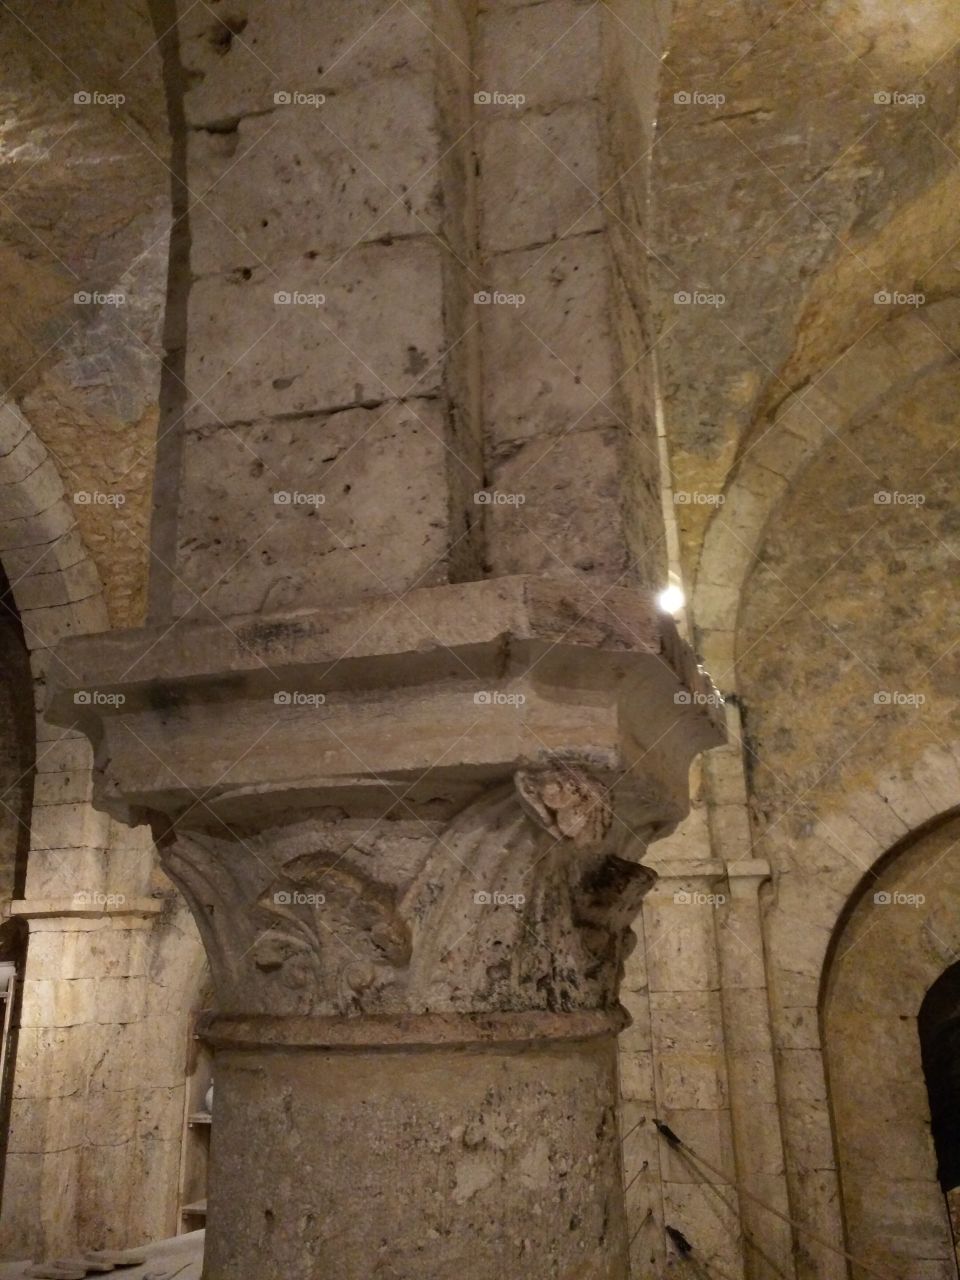 Inside medieval house dated from 12th century, France